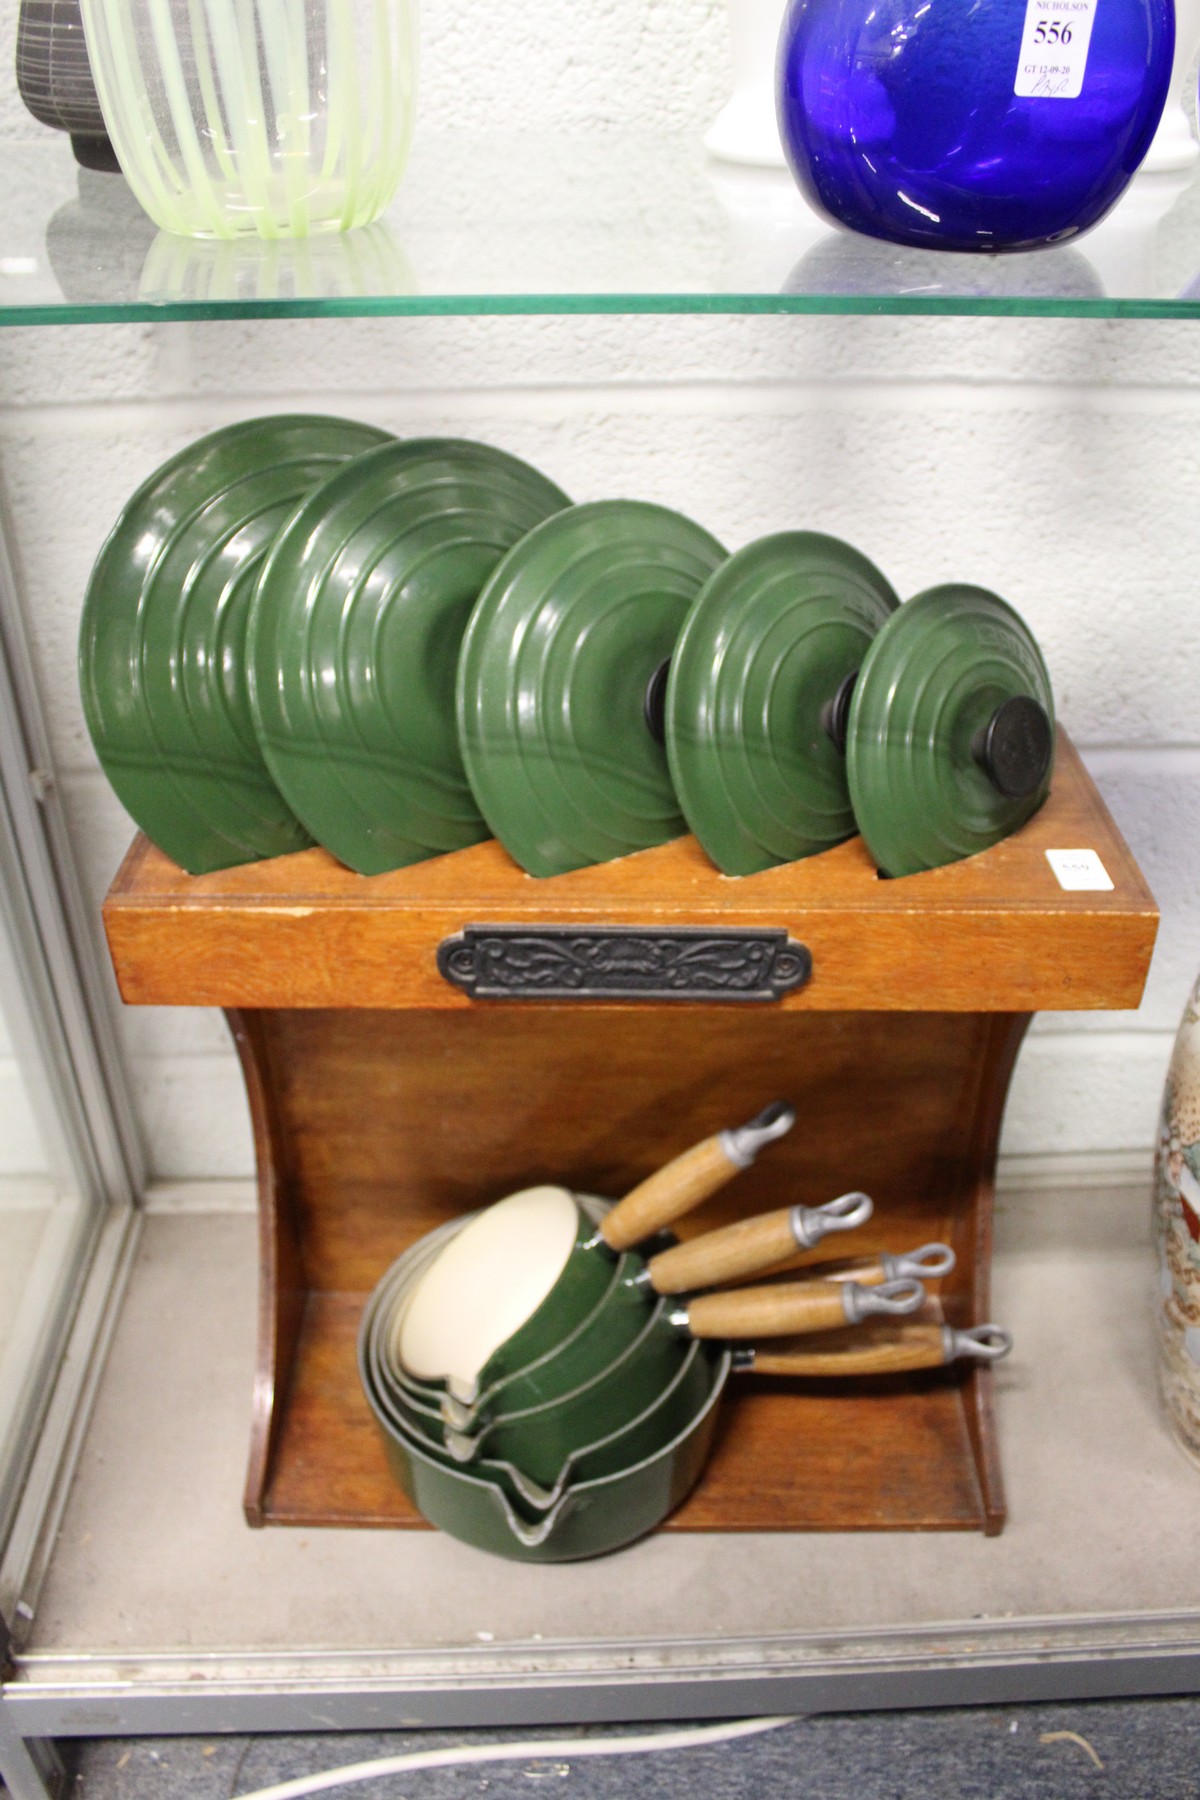 A graduated set of five Le Creuset green cast iron saucepans with lids on original stand.